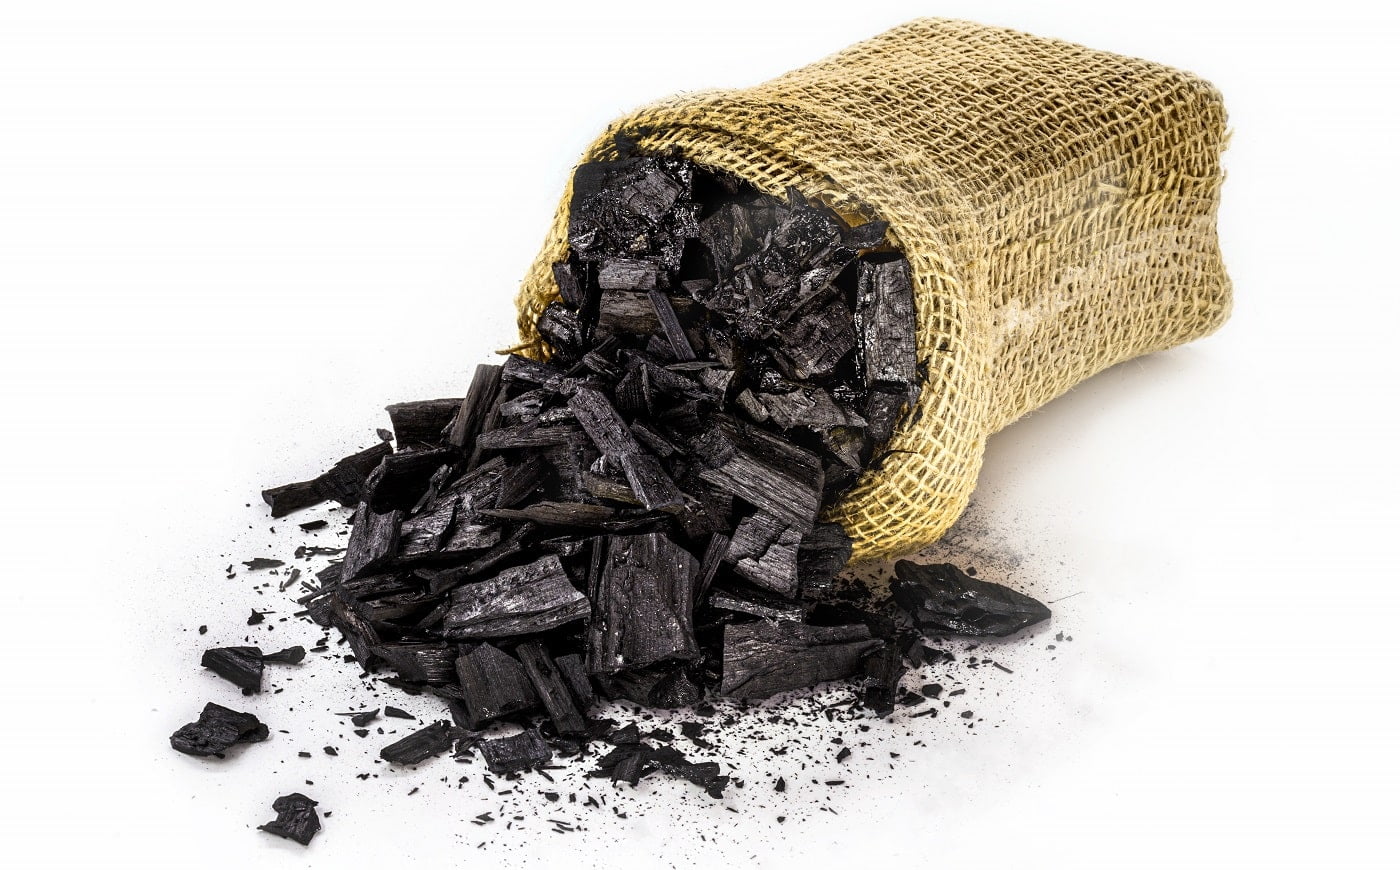 bag of charcoal in pieces, coal based on wood